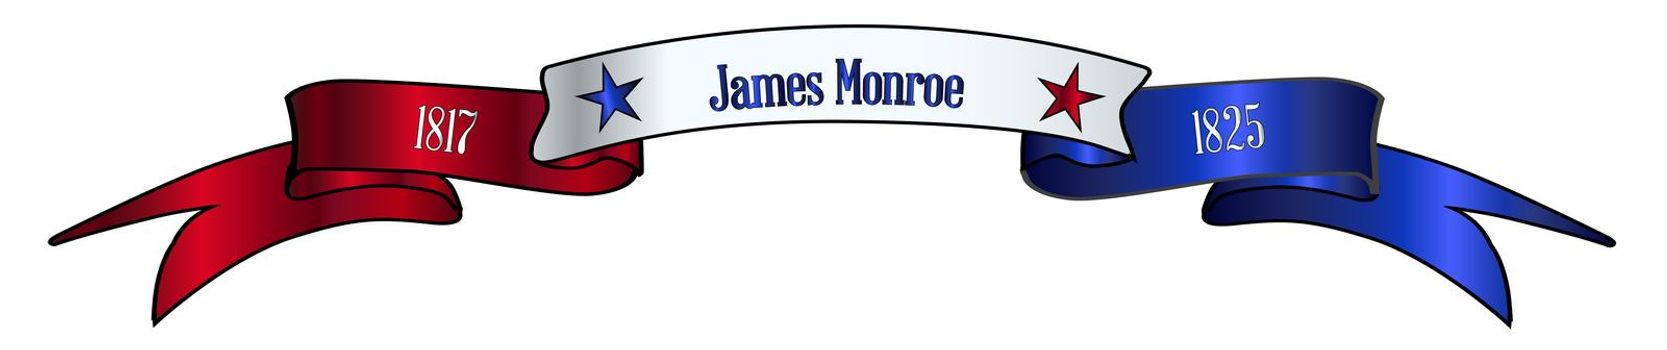 A red white and blue satin or silk ribbon banner with the text James Monroe and stars and date in office